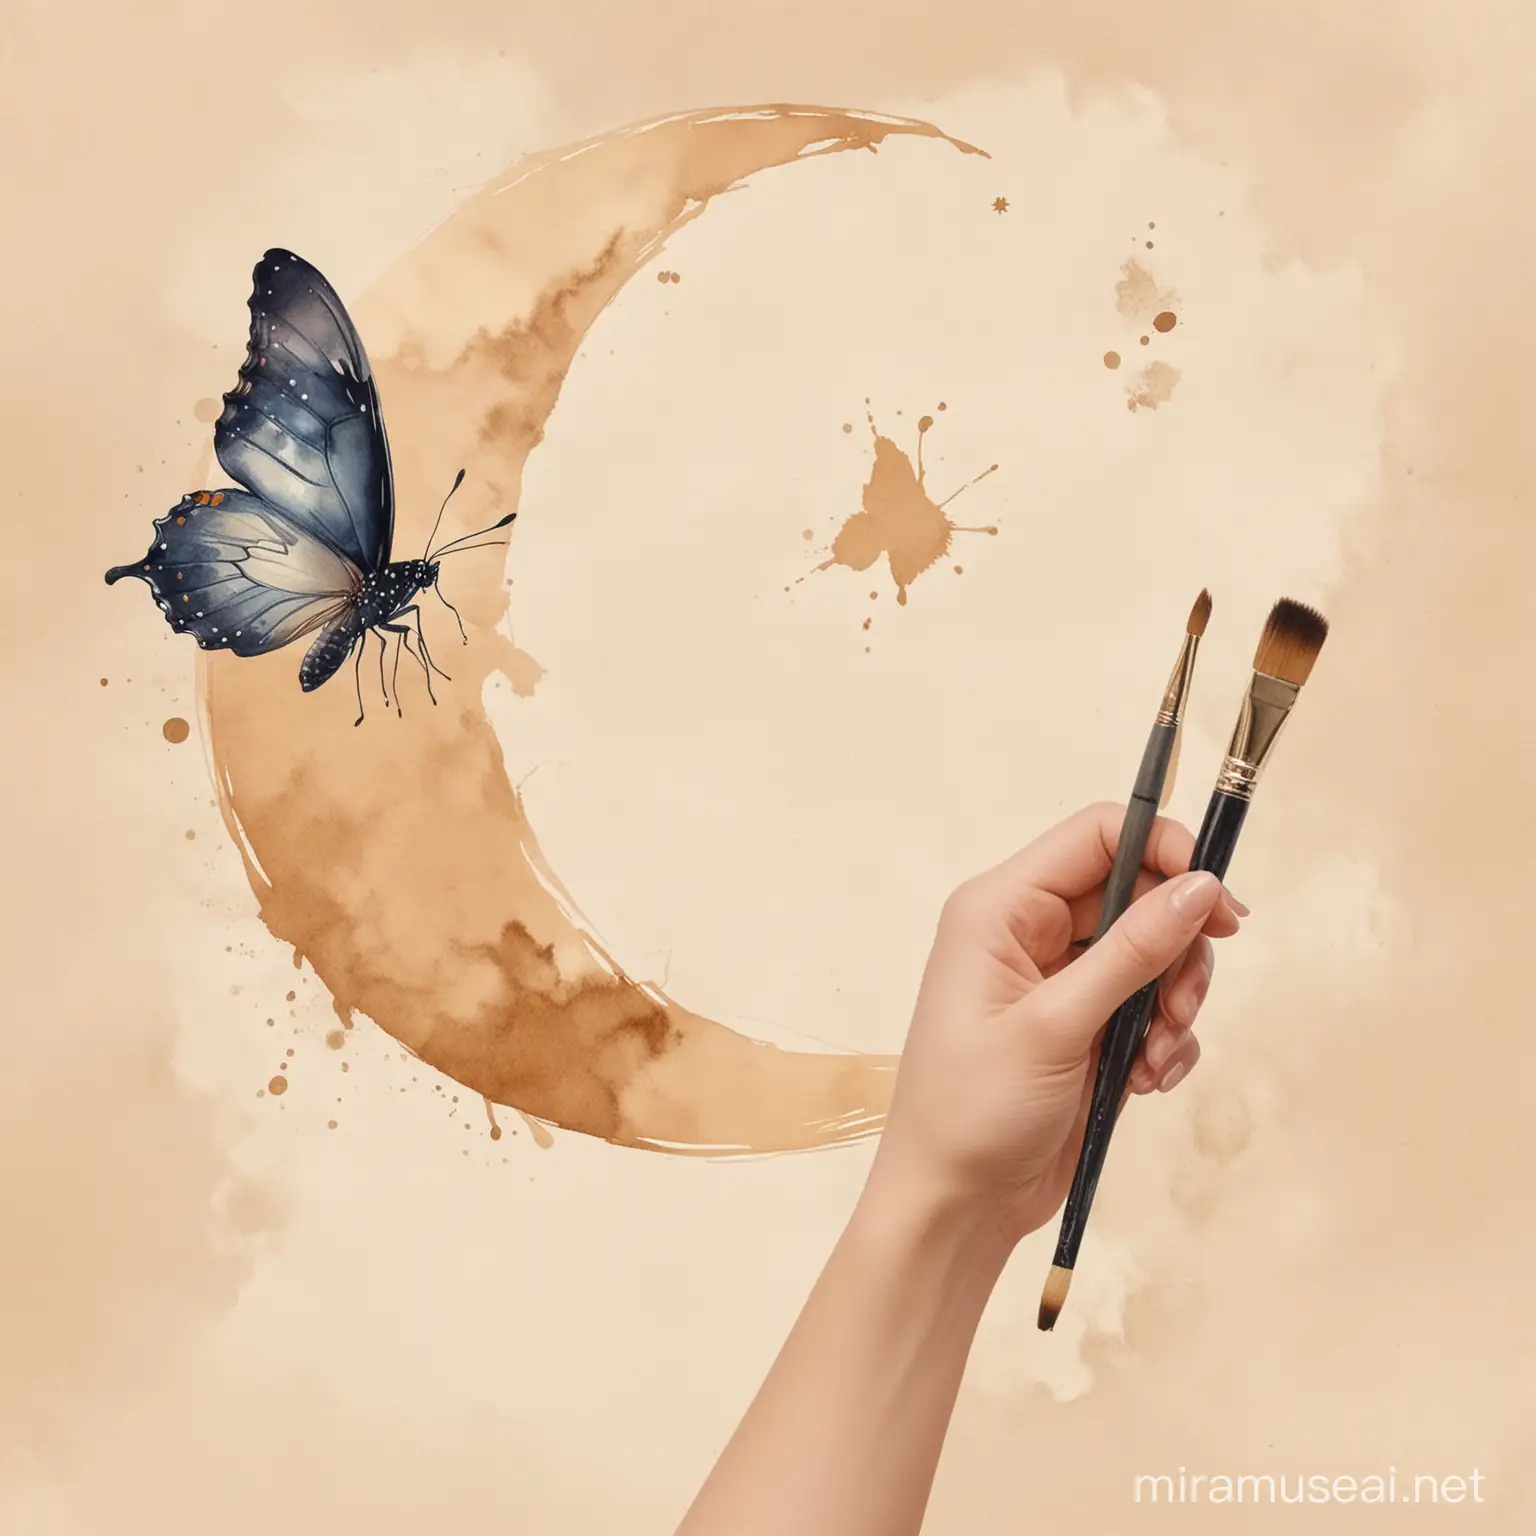 Ethereal Watercolor Crescent Moon with Fluttering Butterfly and Artistic Hand Holding Brush